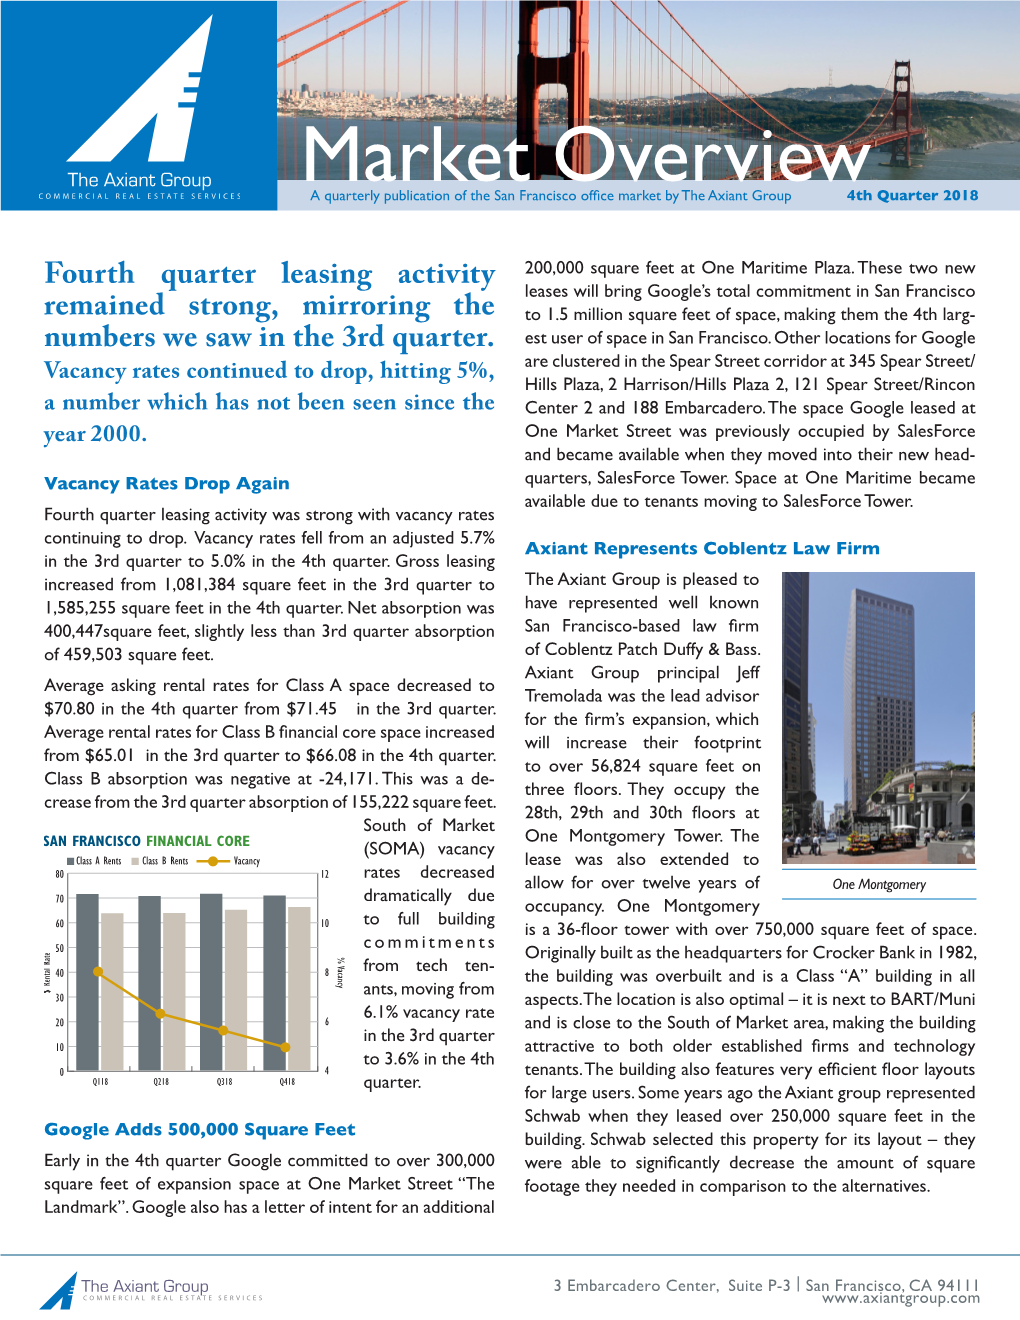 Market Overview a Quarterly Publication of the San Francisco Office Market by the Axiant Group 4Th Quarter 2018